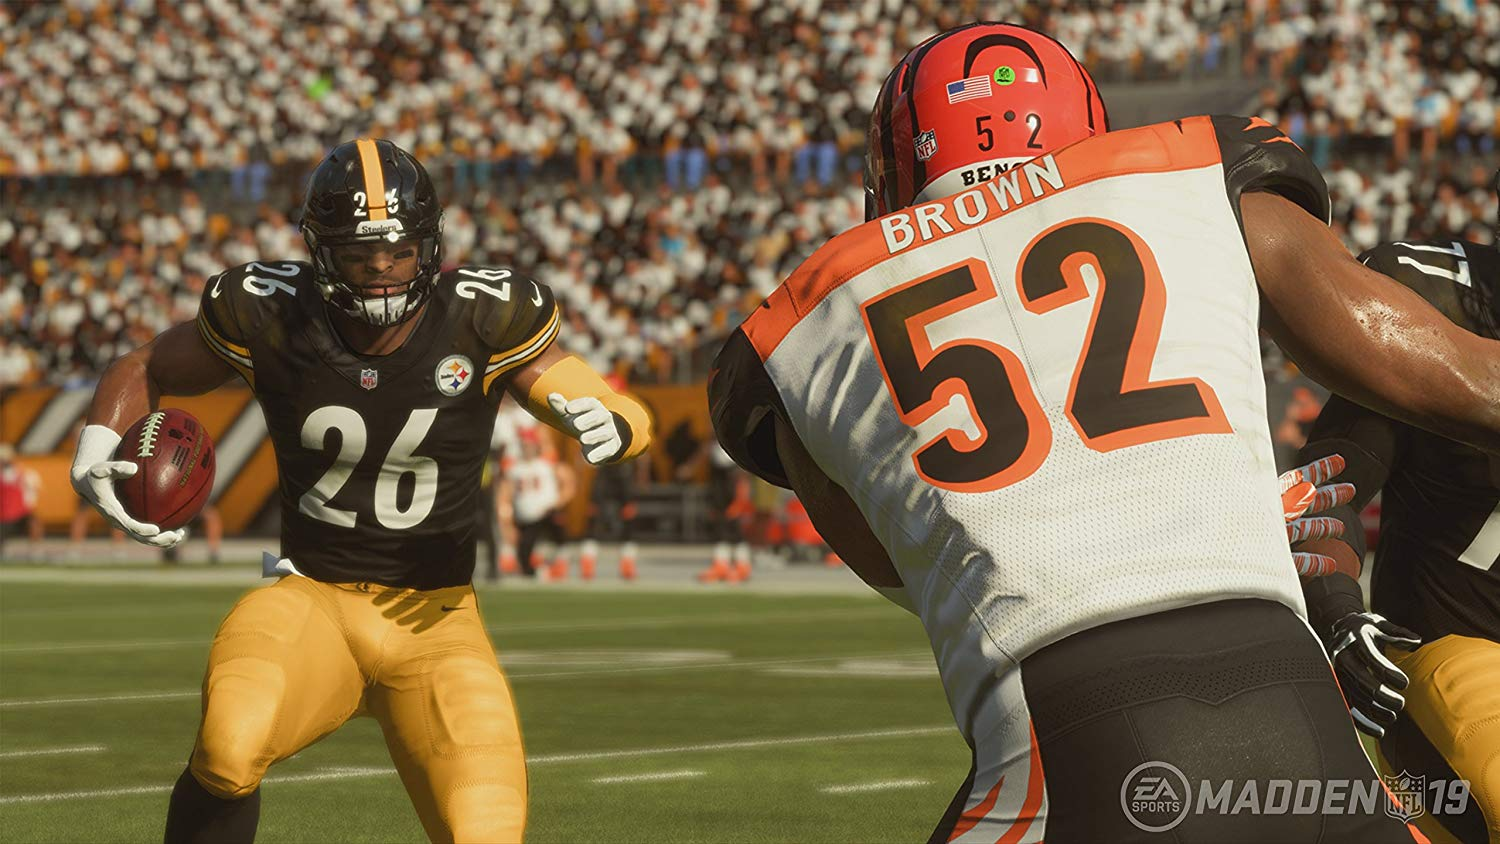 New season, new Madden. Madden 19 boasts a number of new tweaks including a whole new physics system.<br><br> Get yelled at by 12 year-olds online <a href="https://amzn.to/2MM7IuY" "nofollow" target="_blank">here</a>.